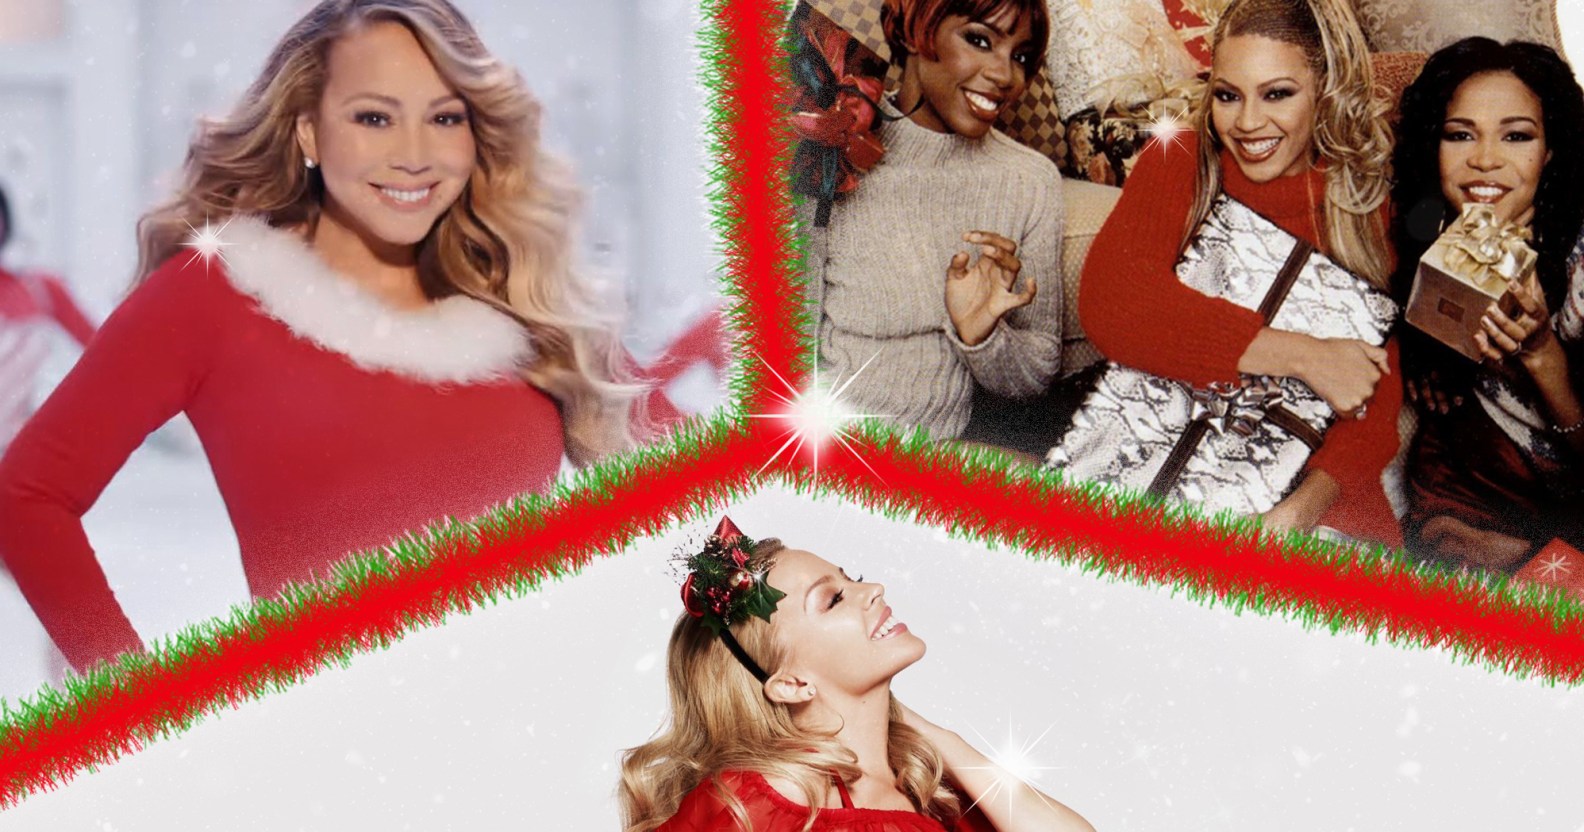 An edited image shows Mariah Carey dressed in a Santa-inspired costume in a music video in the top left hand corner. On the top right is a picture of Destiny's Child. On the bottom half of the picture is Kylie Minogue posing in artwork for her Christmas album. Christmas tinsel separates each image.